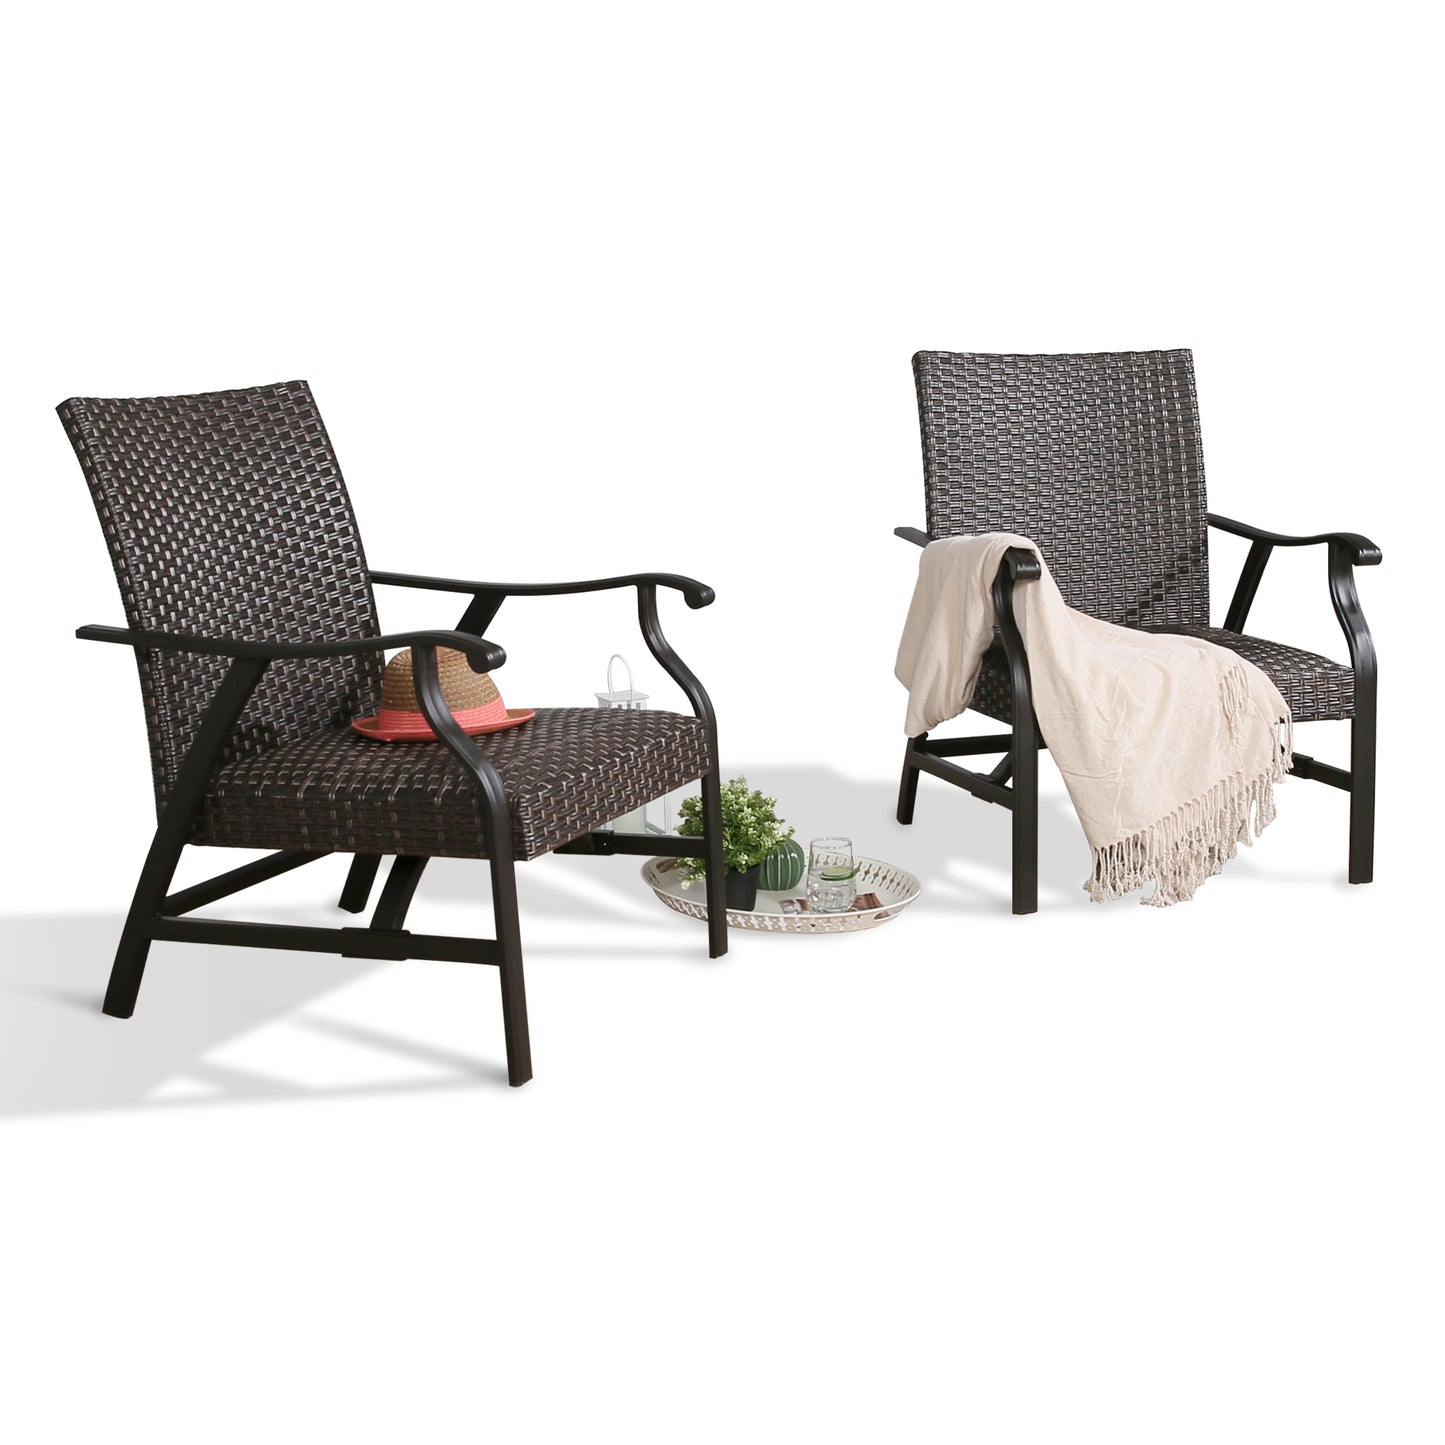 Outdoor Wicker Chairs Patio Wicker Padded Rocking Motion Conversation Chair for Poolside, Garden, Porch, Set of 2